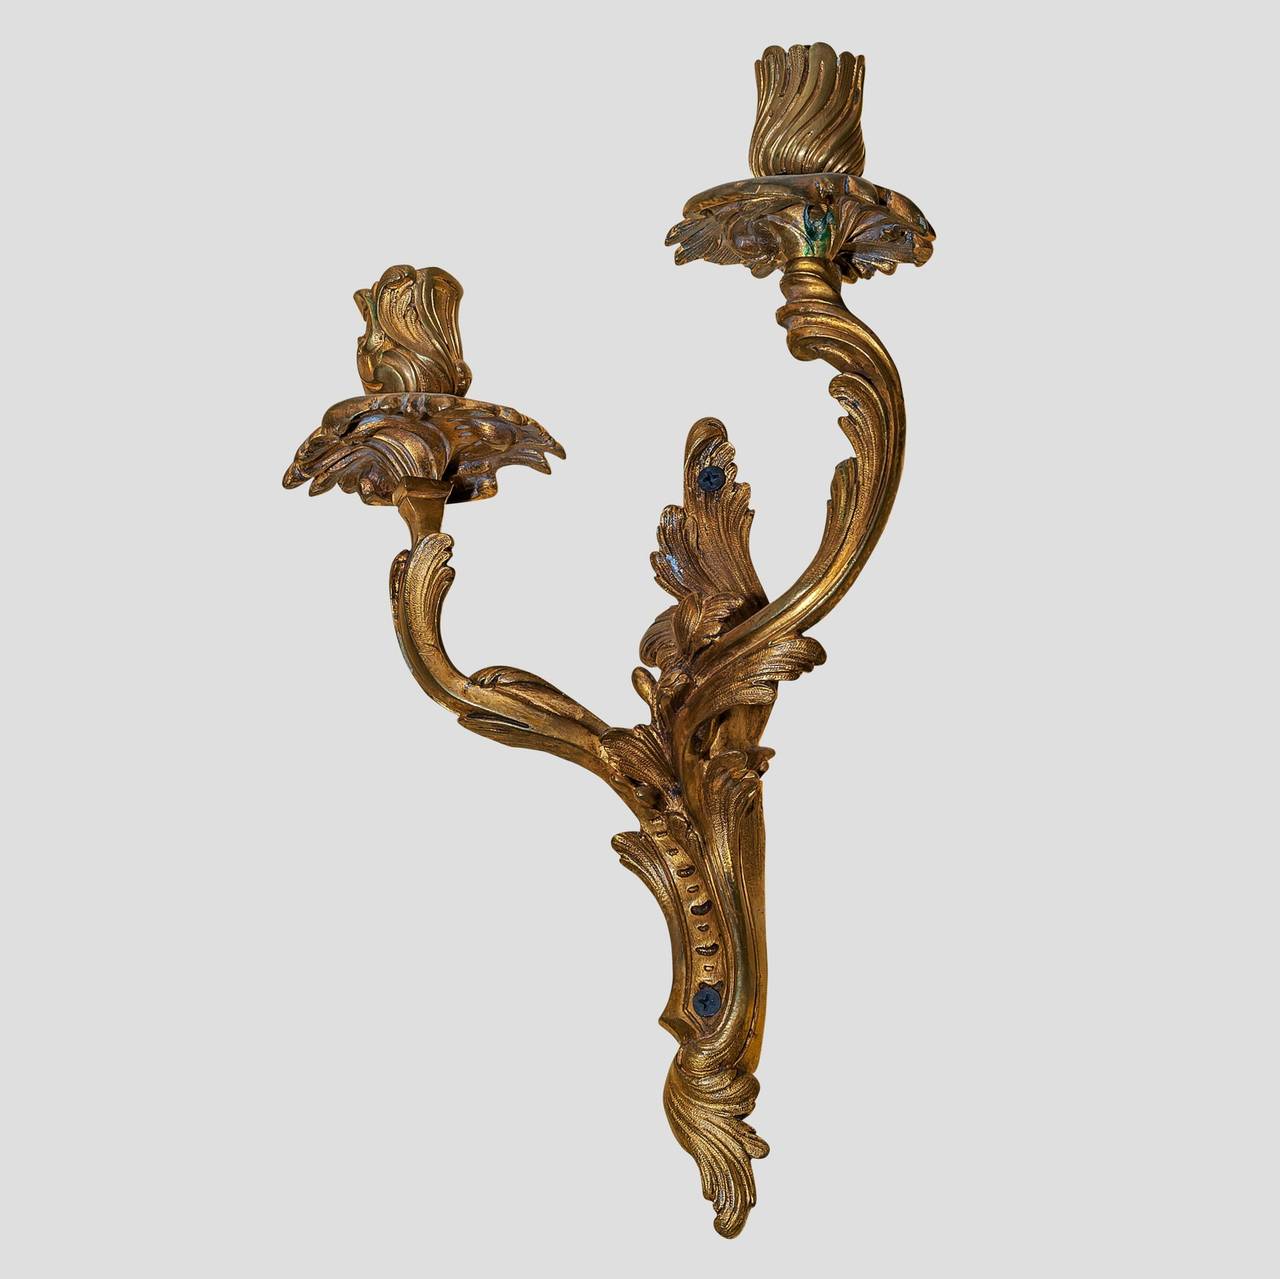 Set of Four Gilt Bronze Two-Arm Wall Sconces
Stock Number: L288